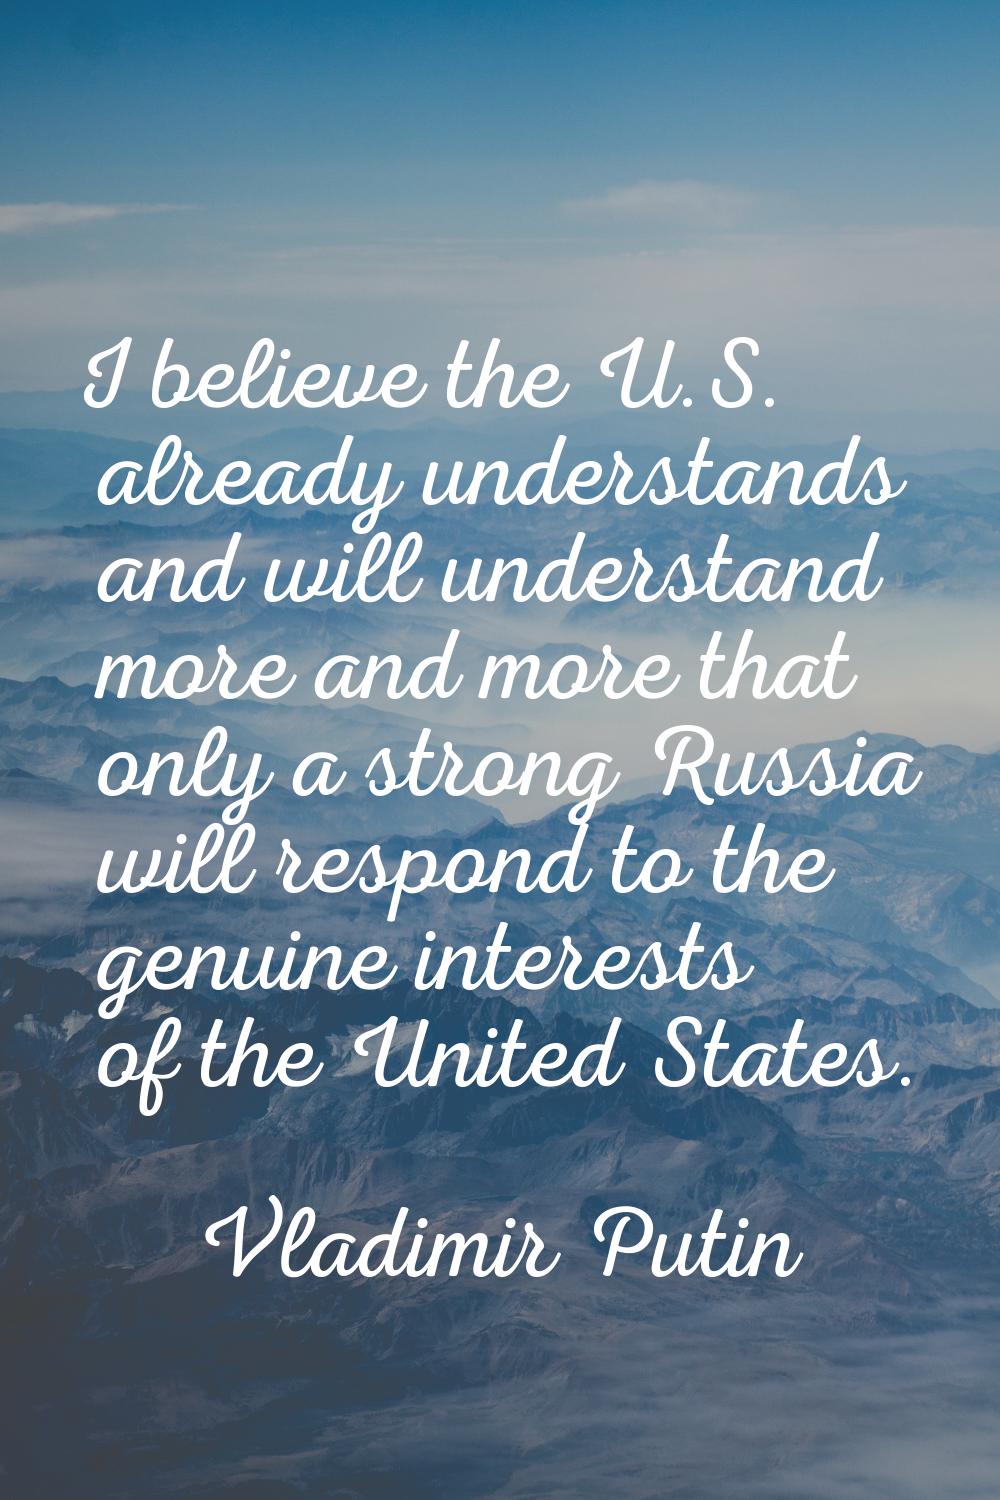 I believe the U.S. already understands and will understand more and more that only a strong Russia 